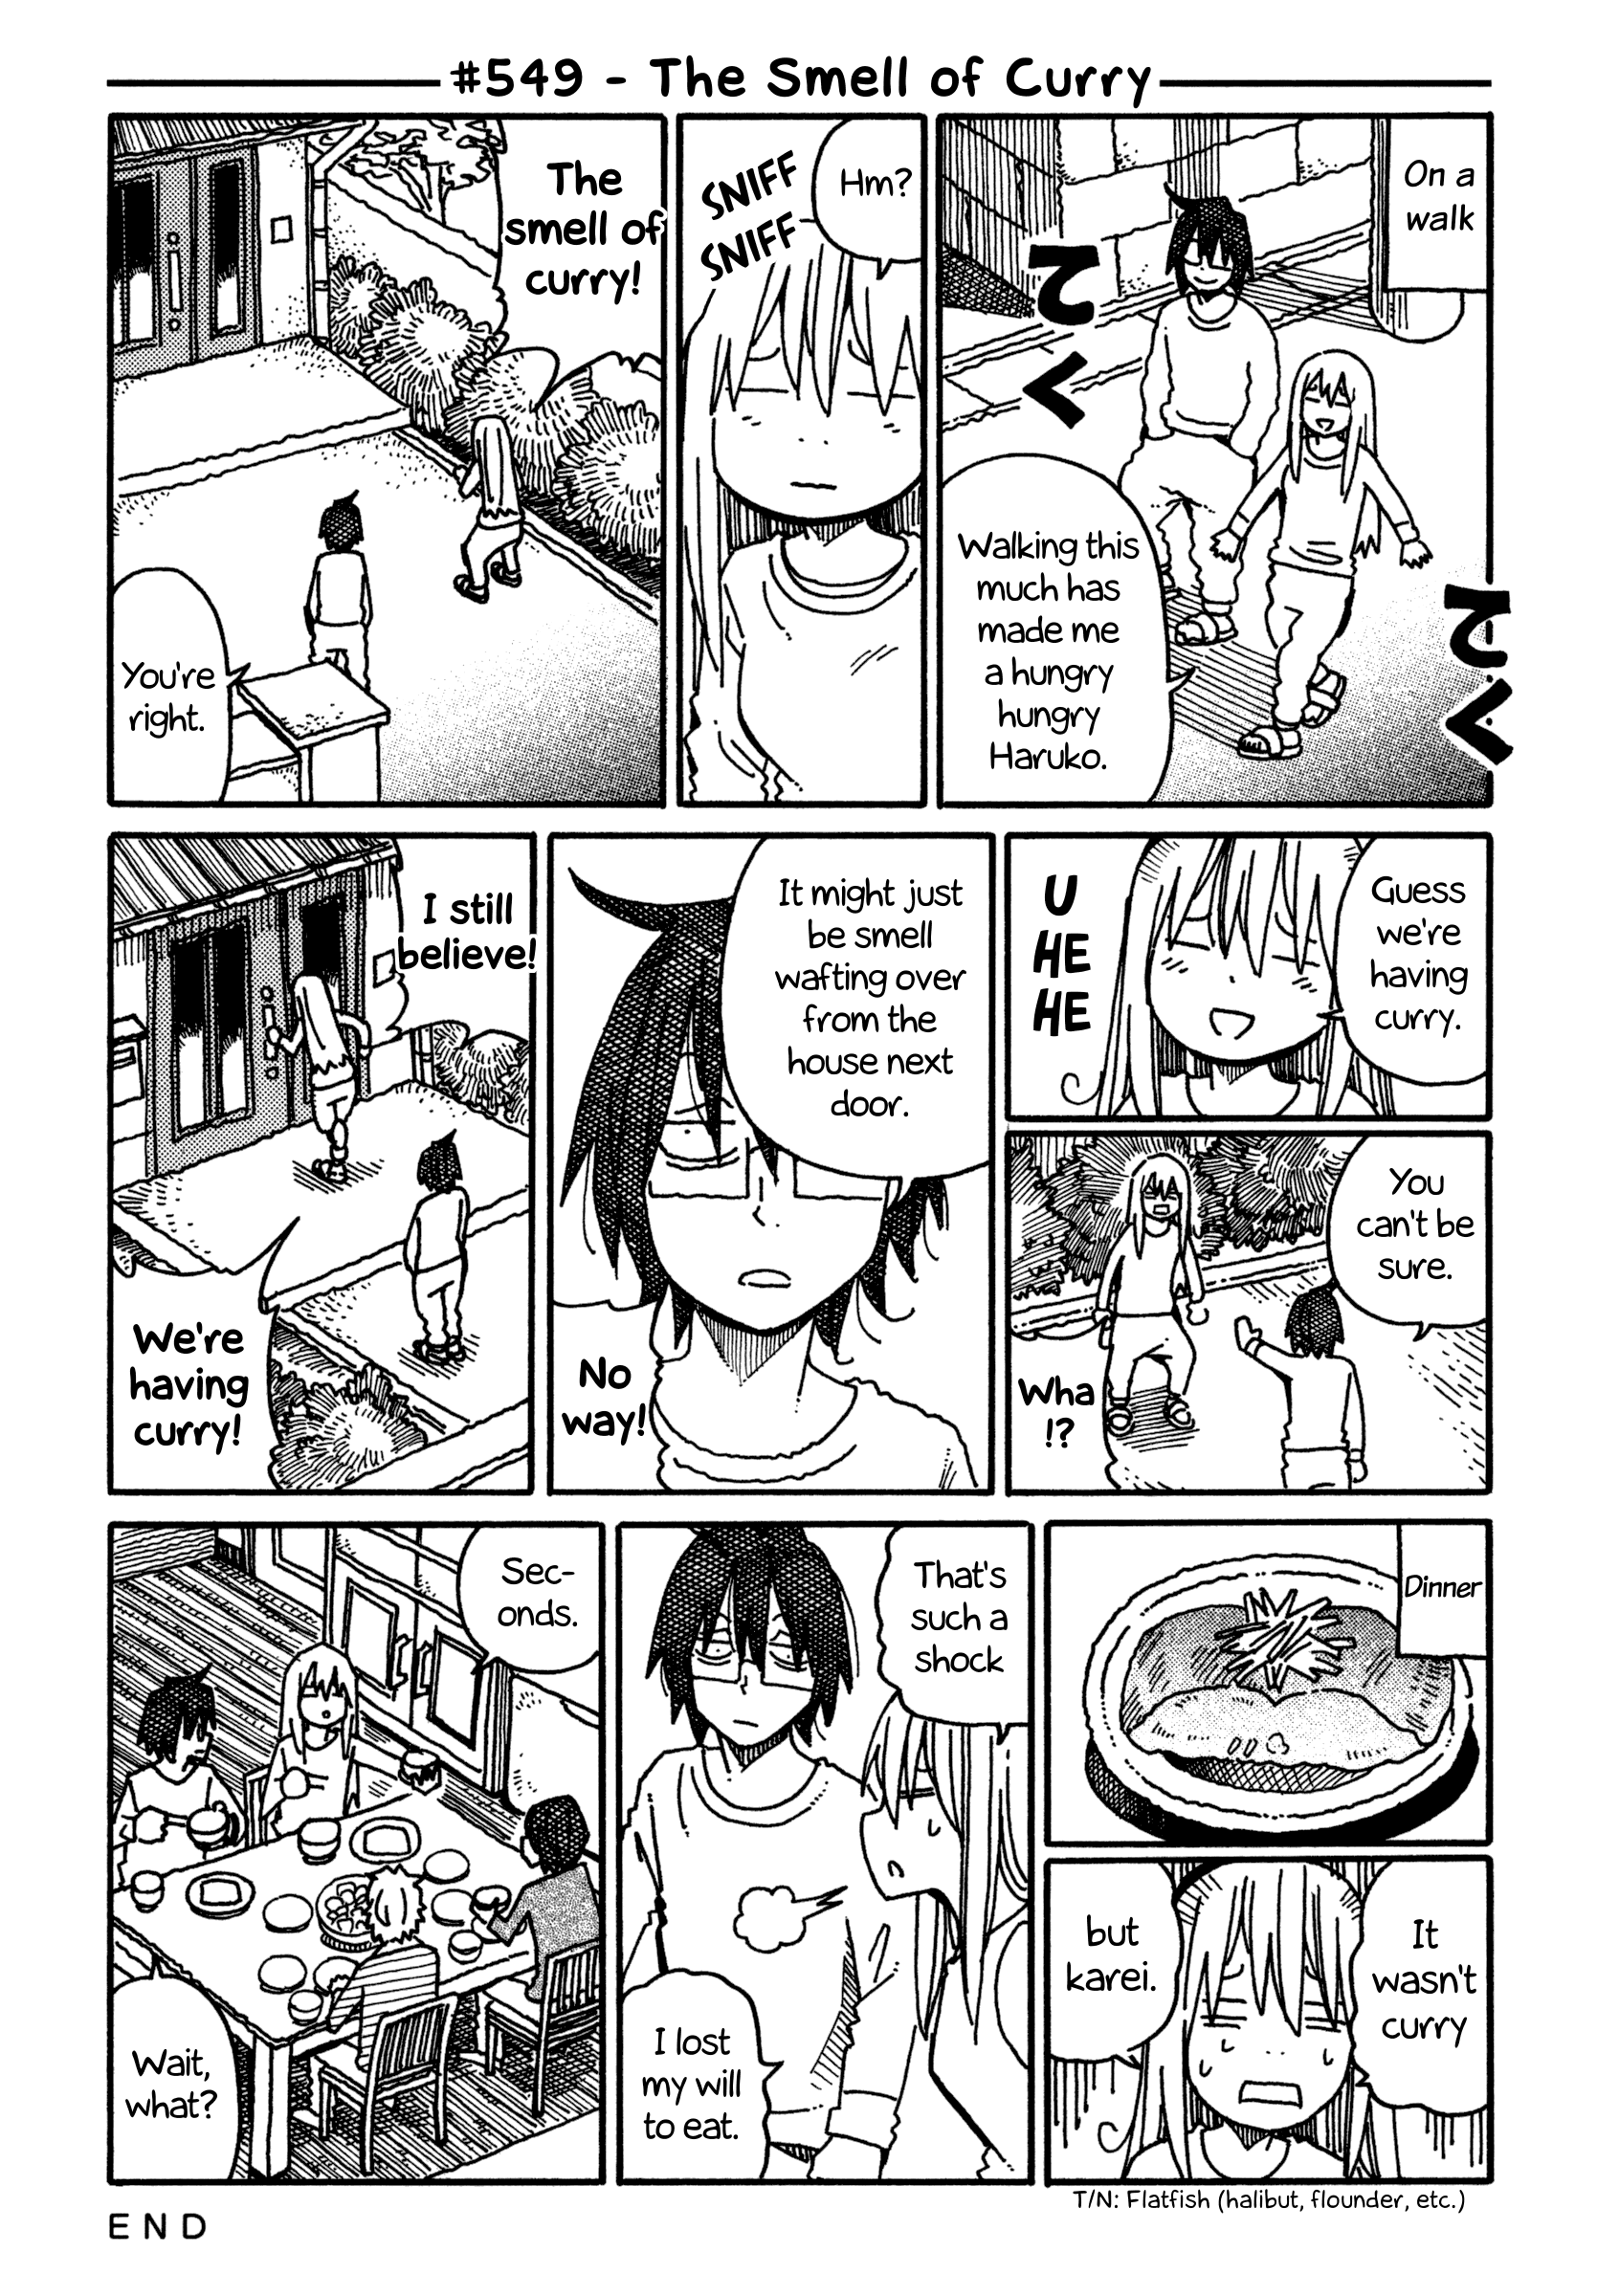 Hatarakanai Futari (The Jobless Siblings) Vol.10 Chapter 549: The Smell of Curry